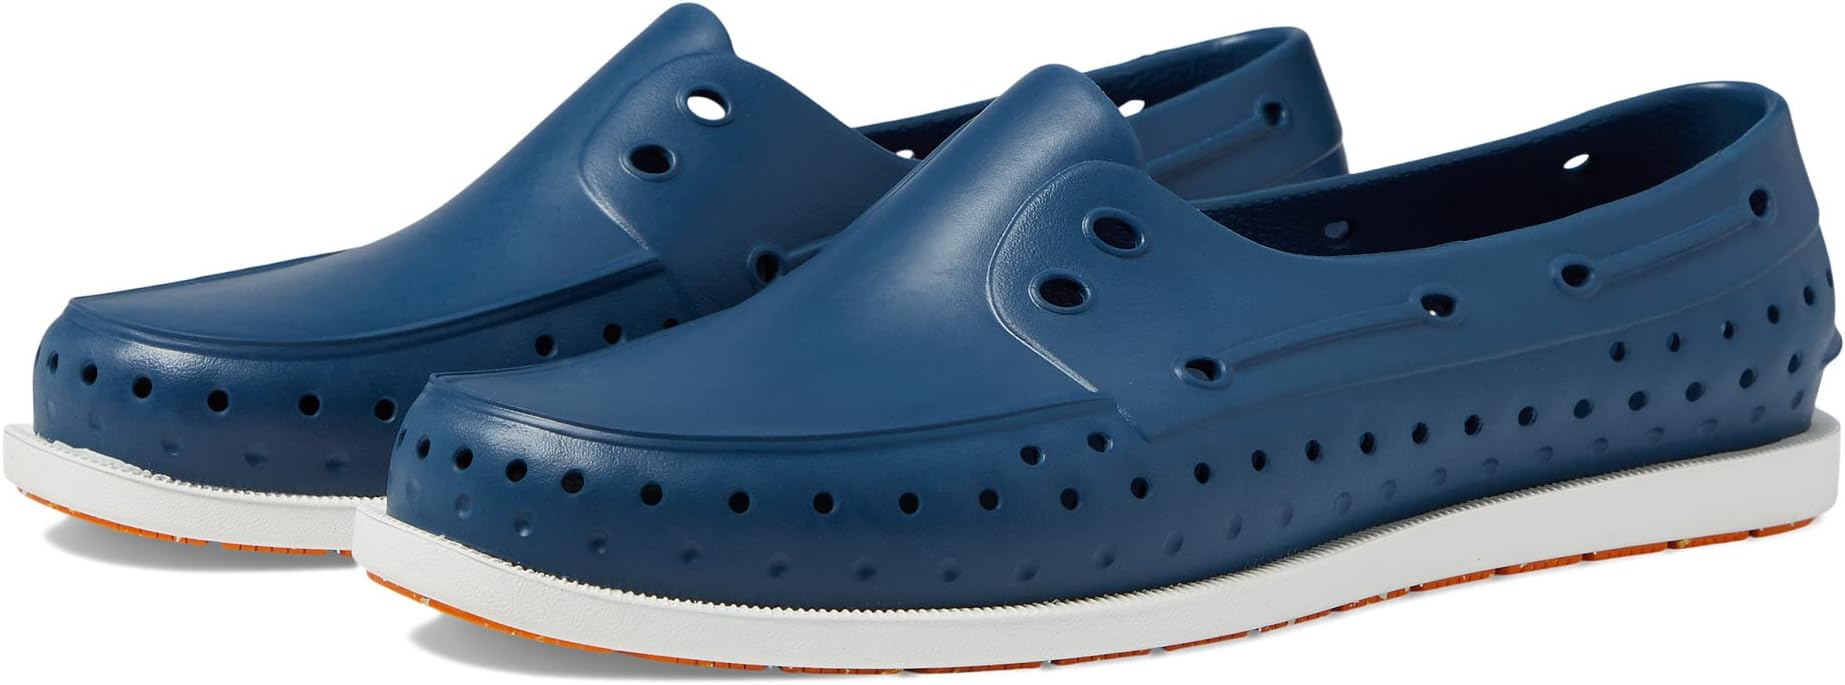 Лоферы Howard Sugarlite Native Shoes, цвет Frontier Blue/Shell White/Foxtail Speckle Rubber кроссовки robbie native shoes kids цвет victoria blue shell white mash speckle rubber